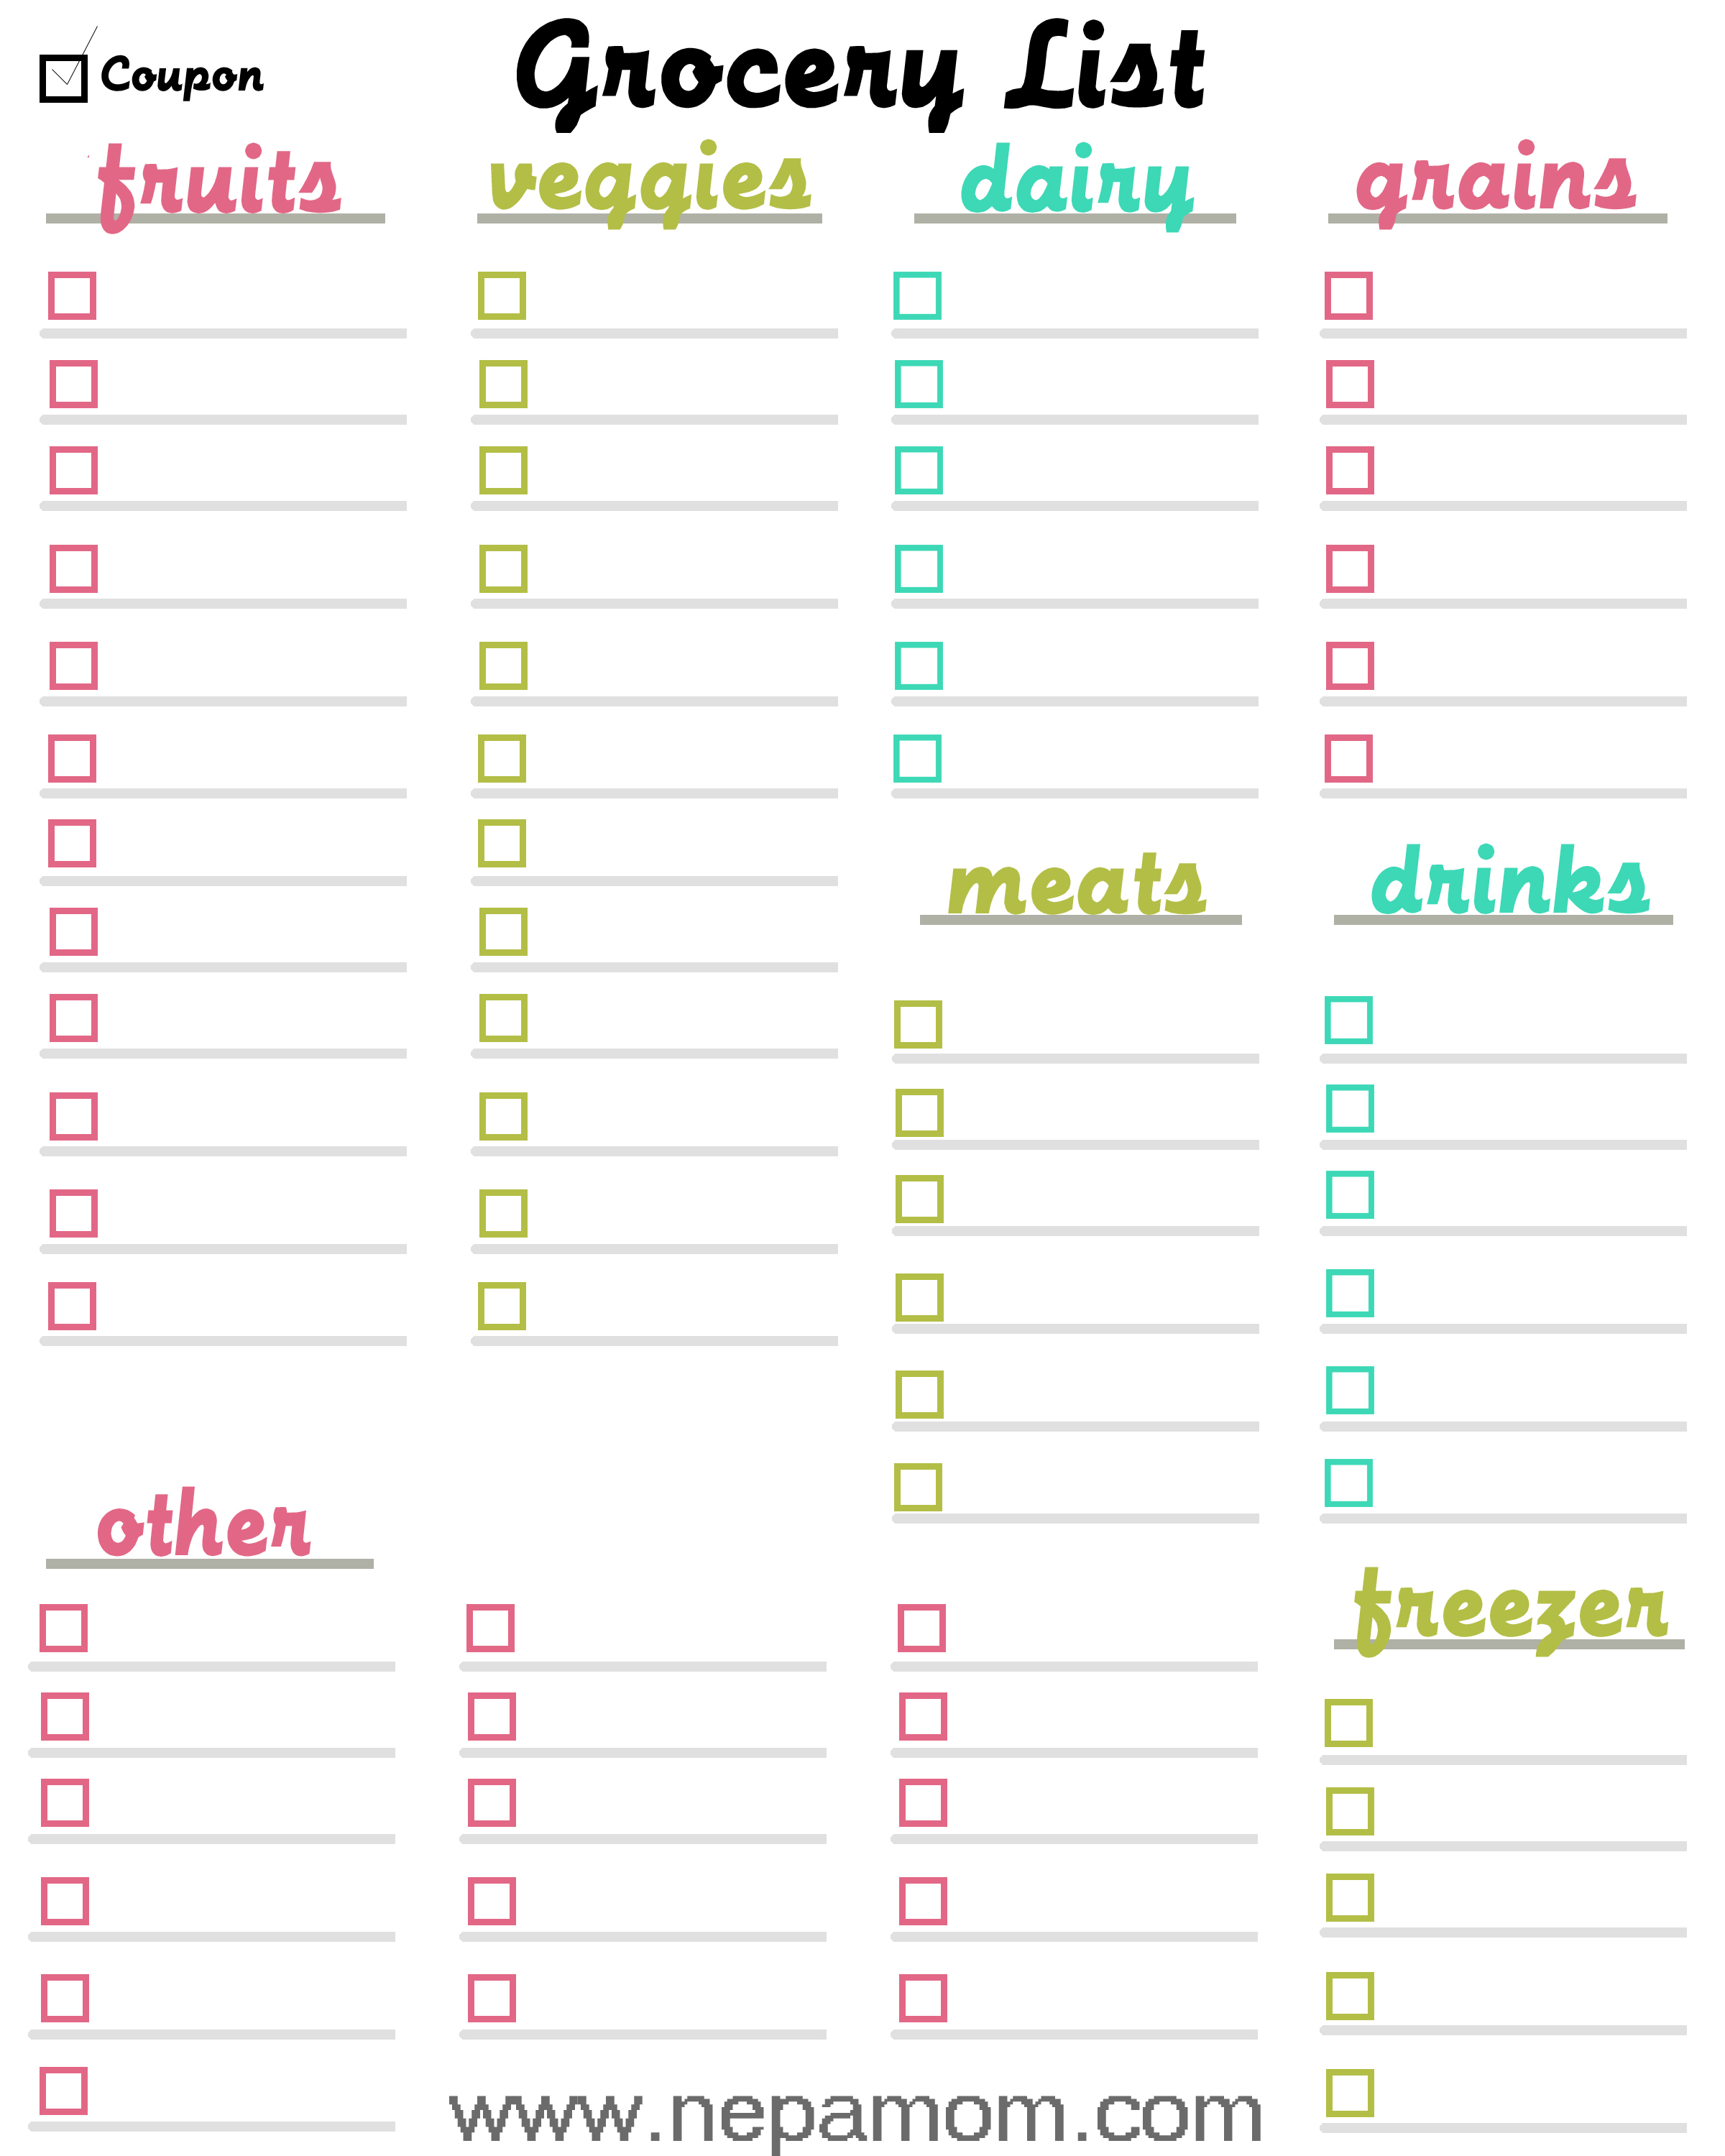 Grocery Shopping List Template Print This Template Out And Save Money And Time At The Grocery Store